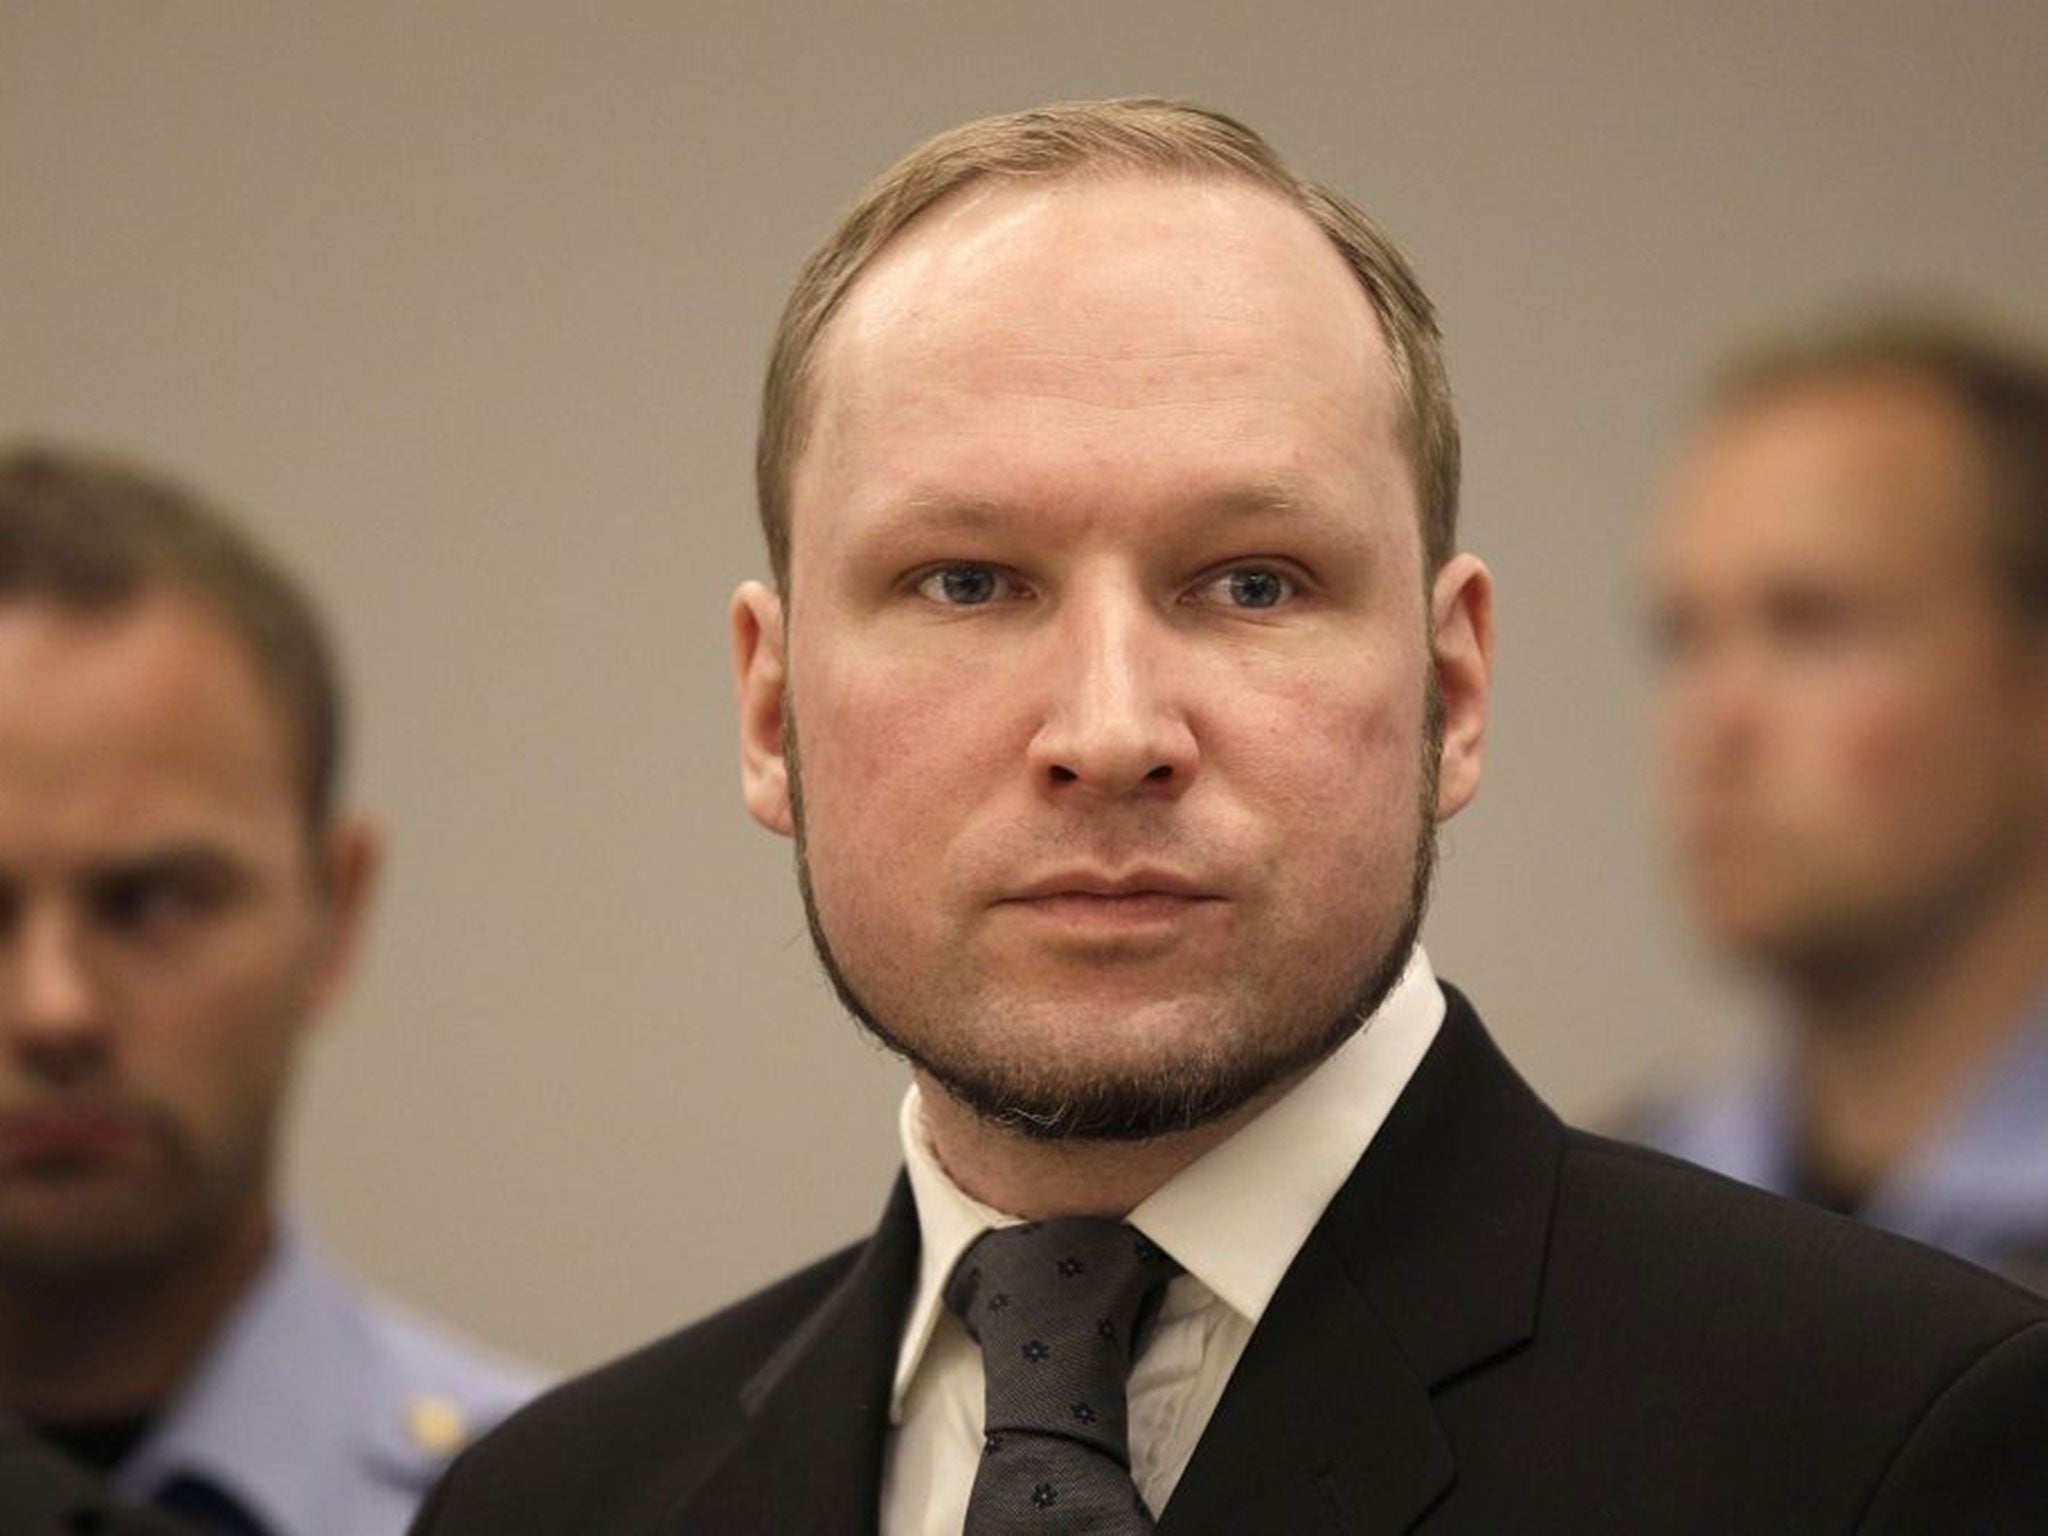 Anders Behring Breivik has secured a place at university